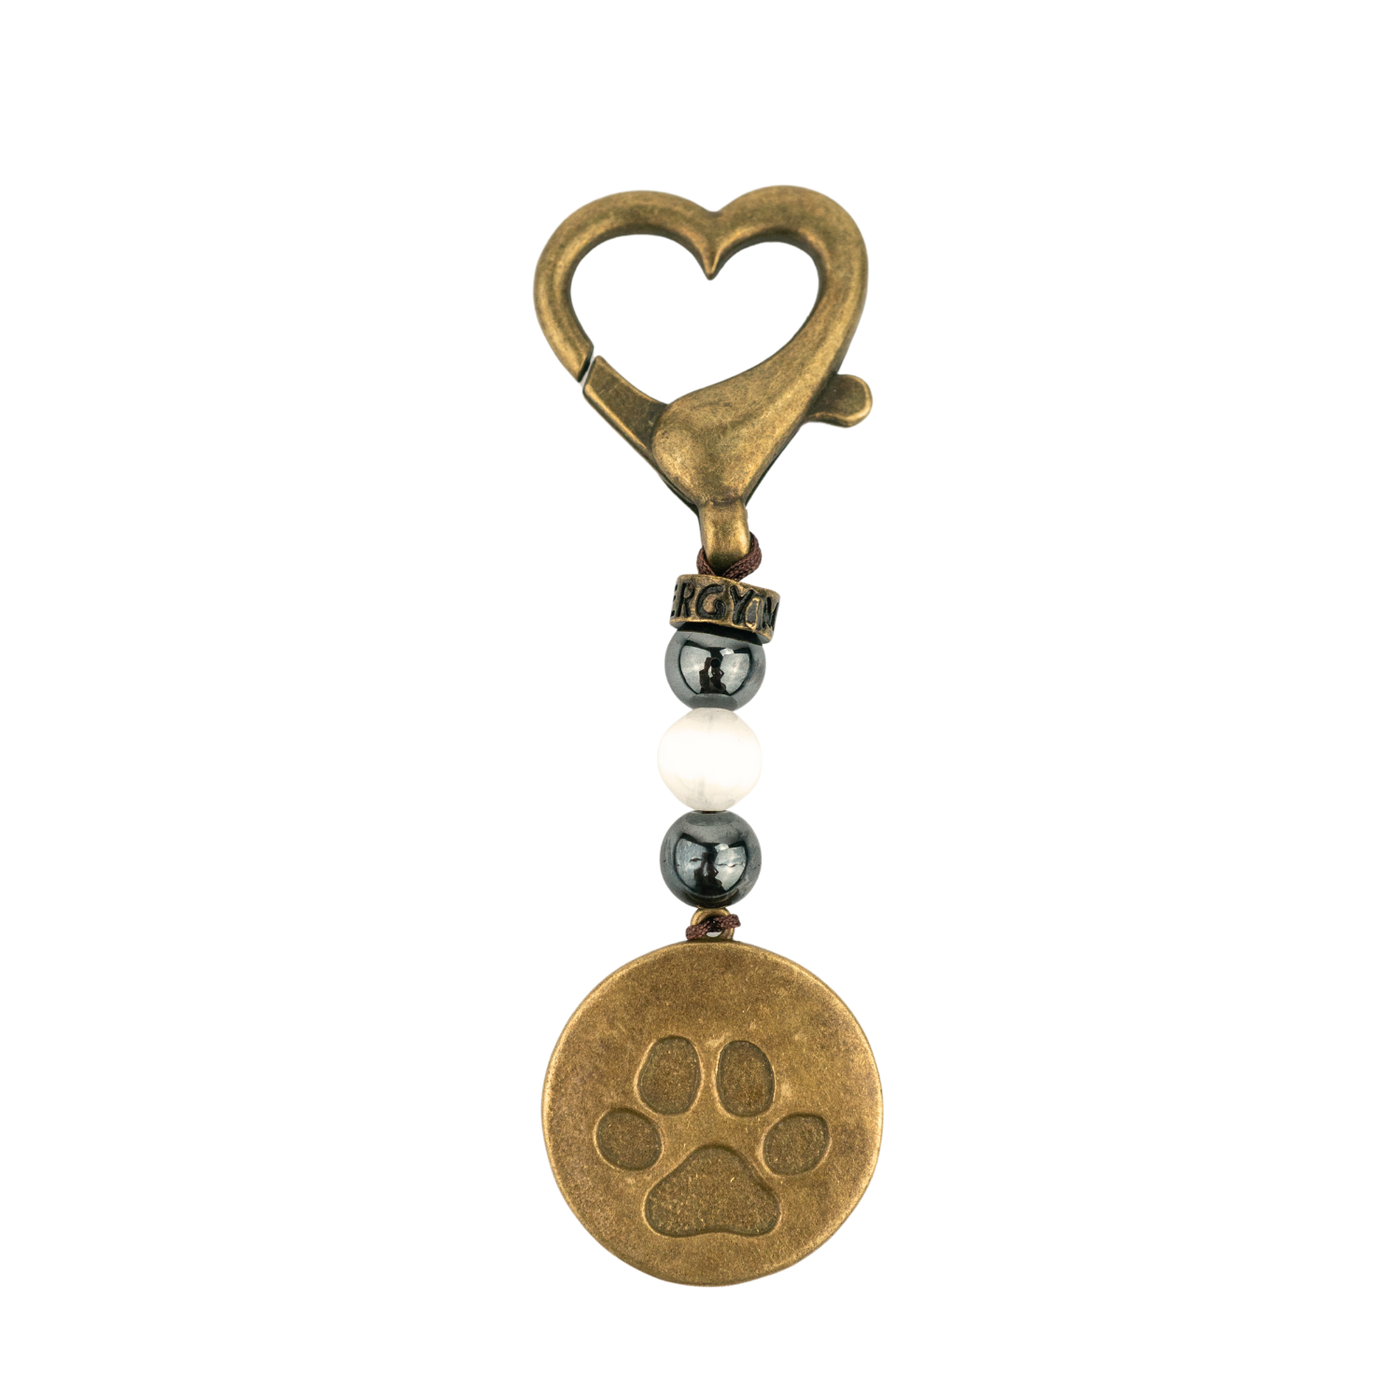 Separation Anxiety Pet Charm